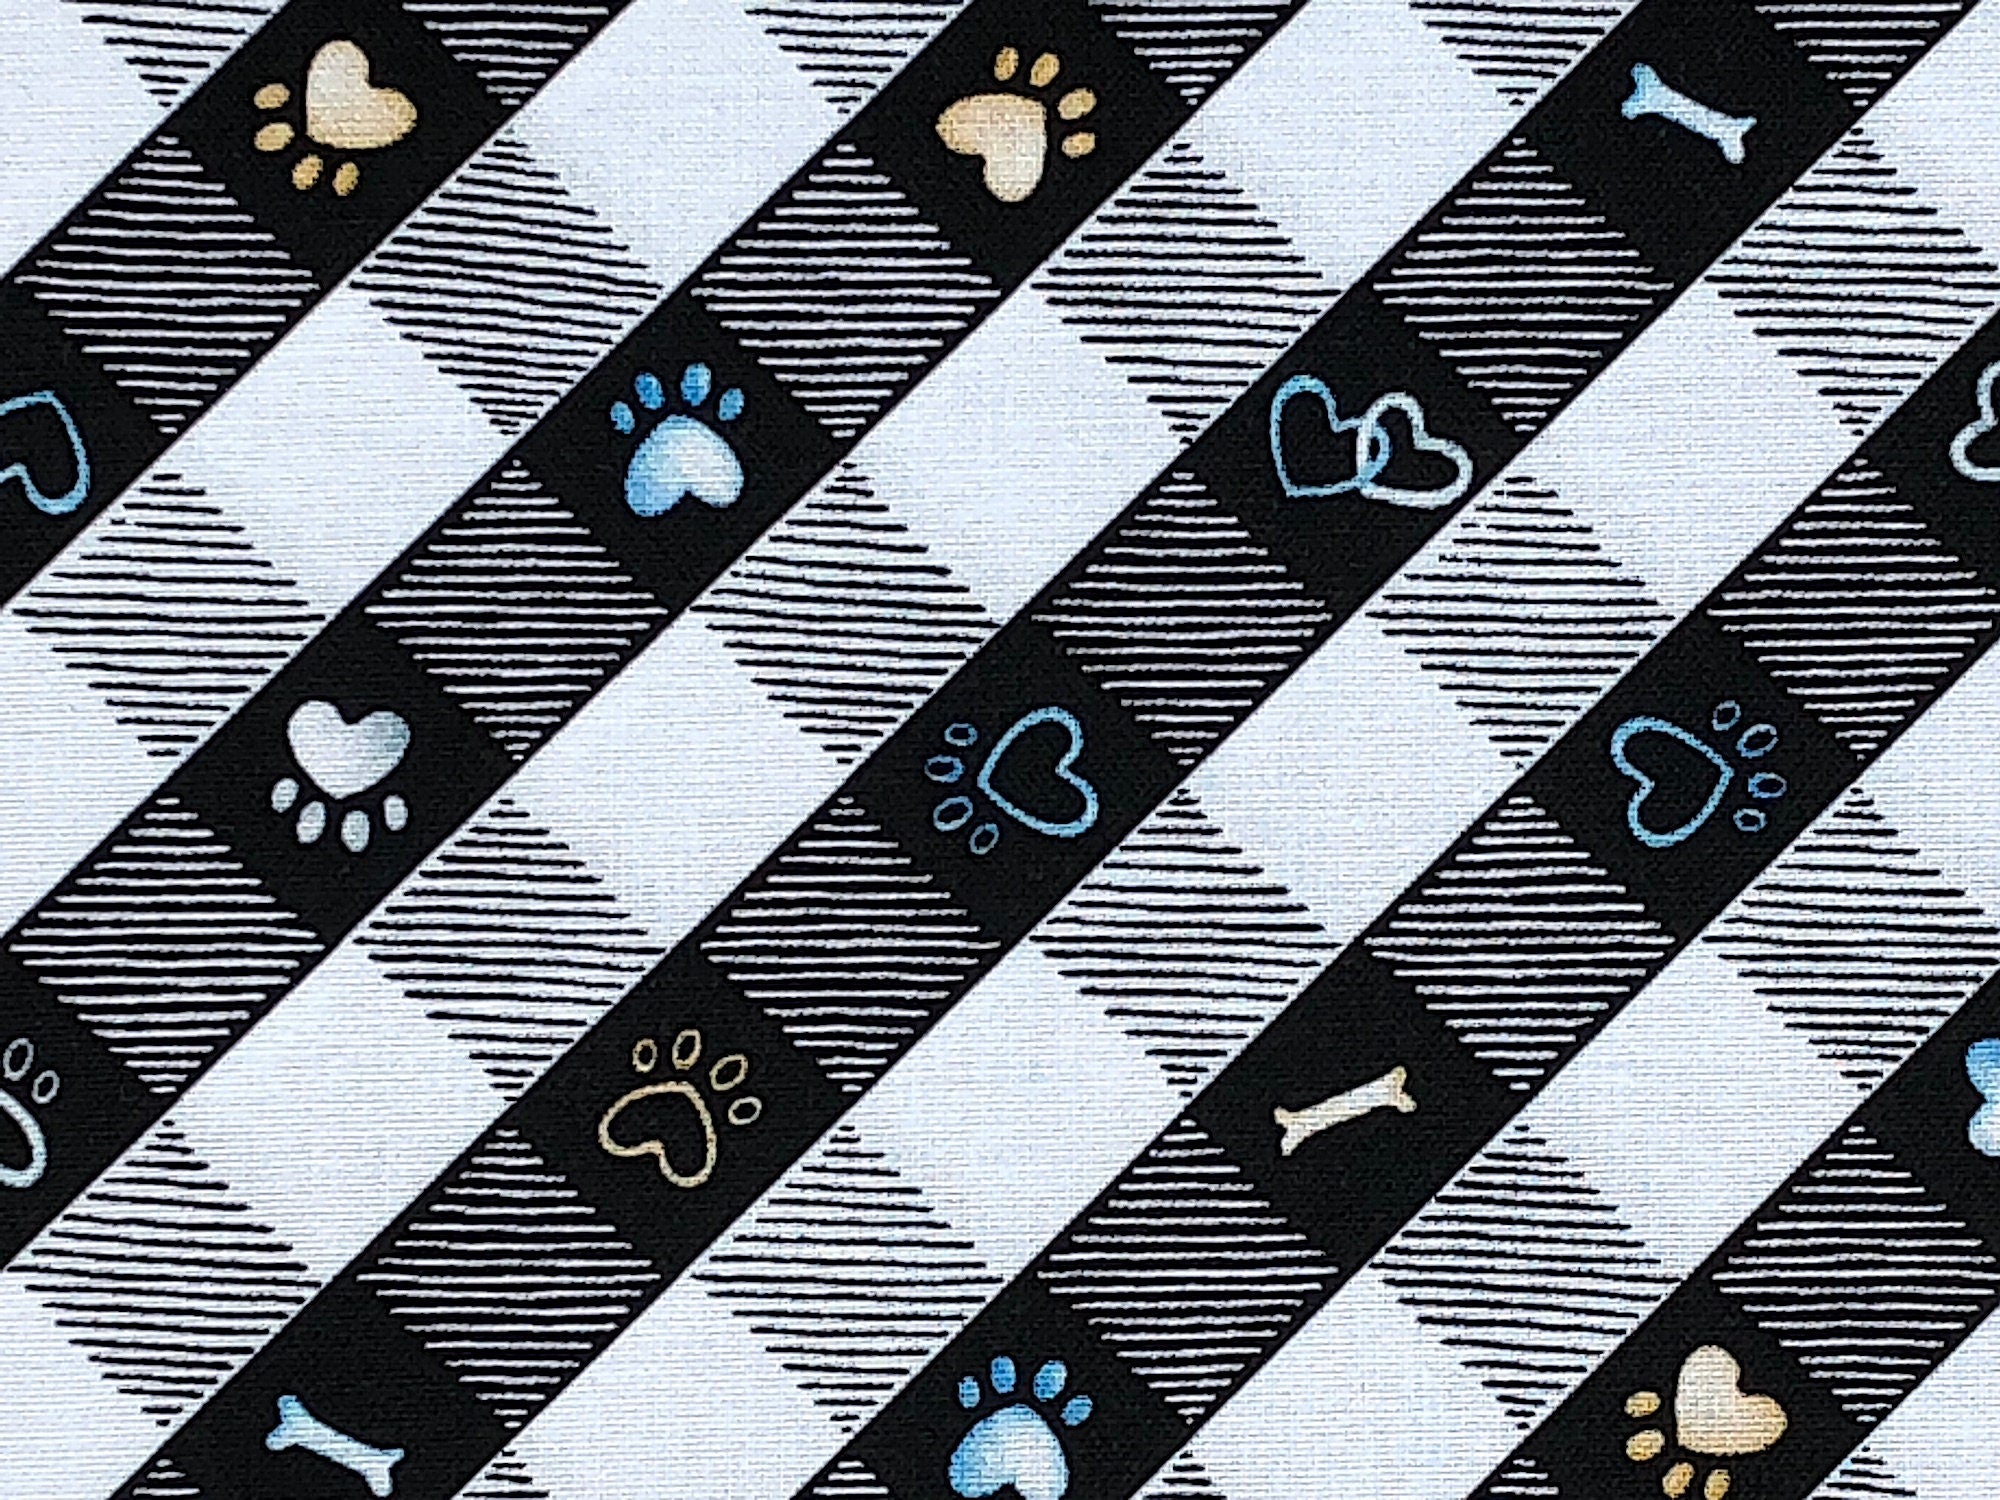 Close up of black and white checkered print , the black squares have paw prints or bones in them.